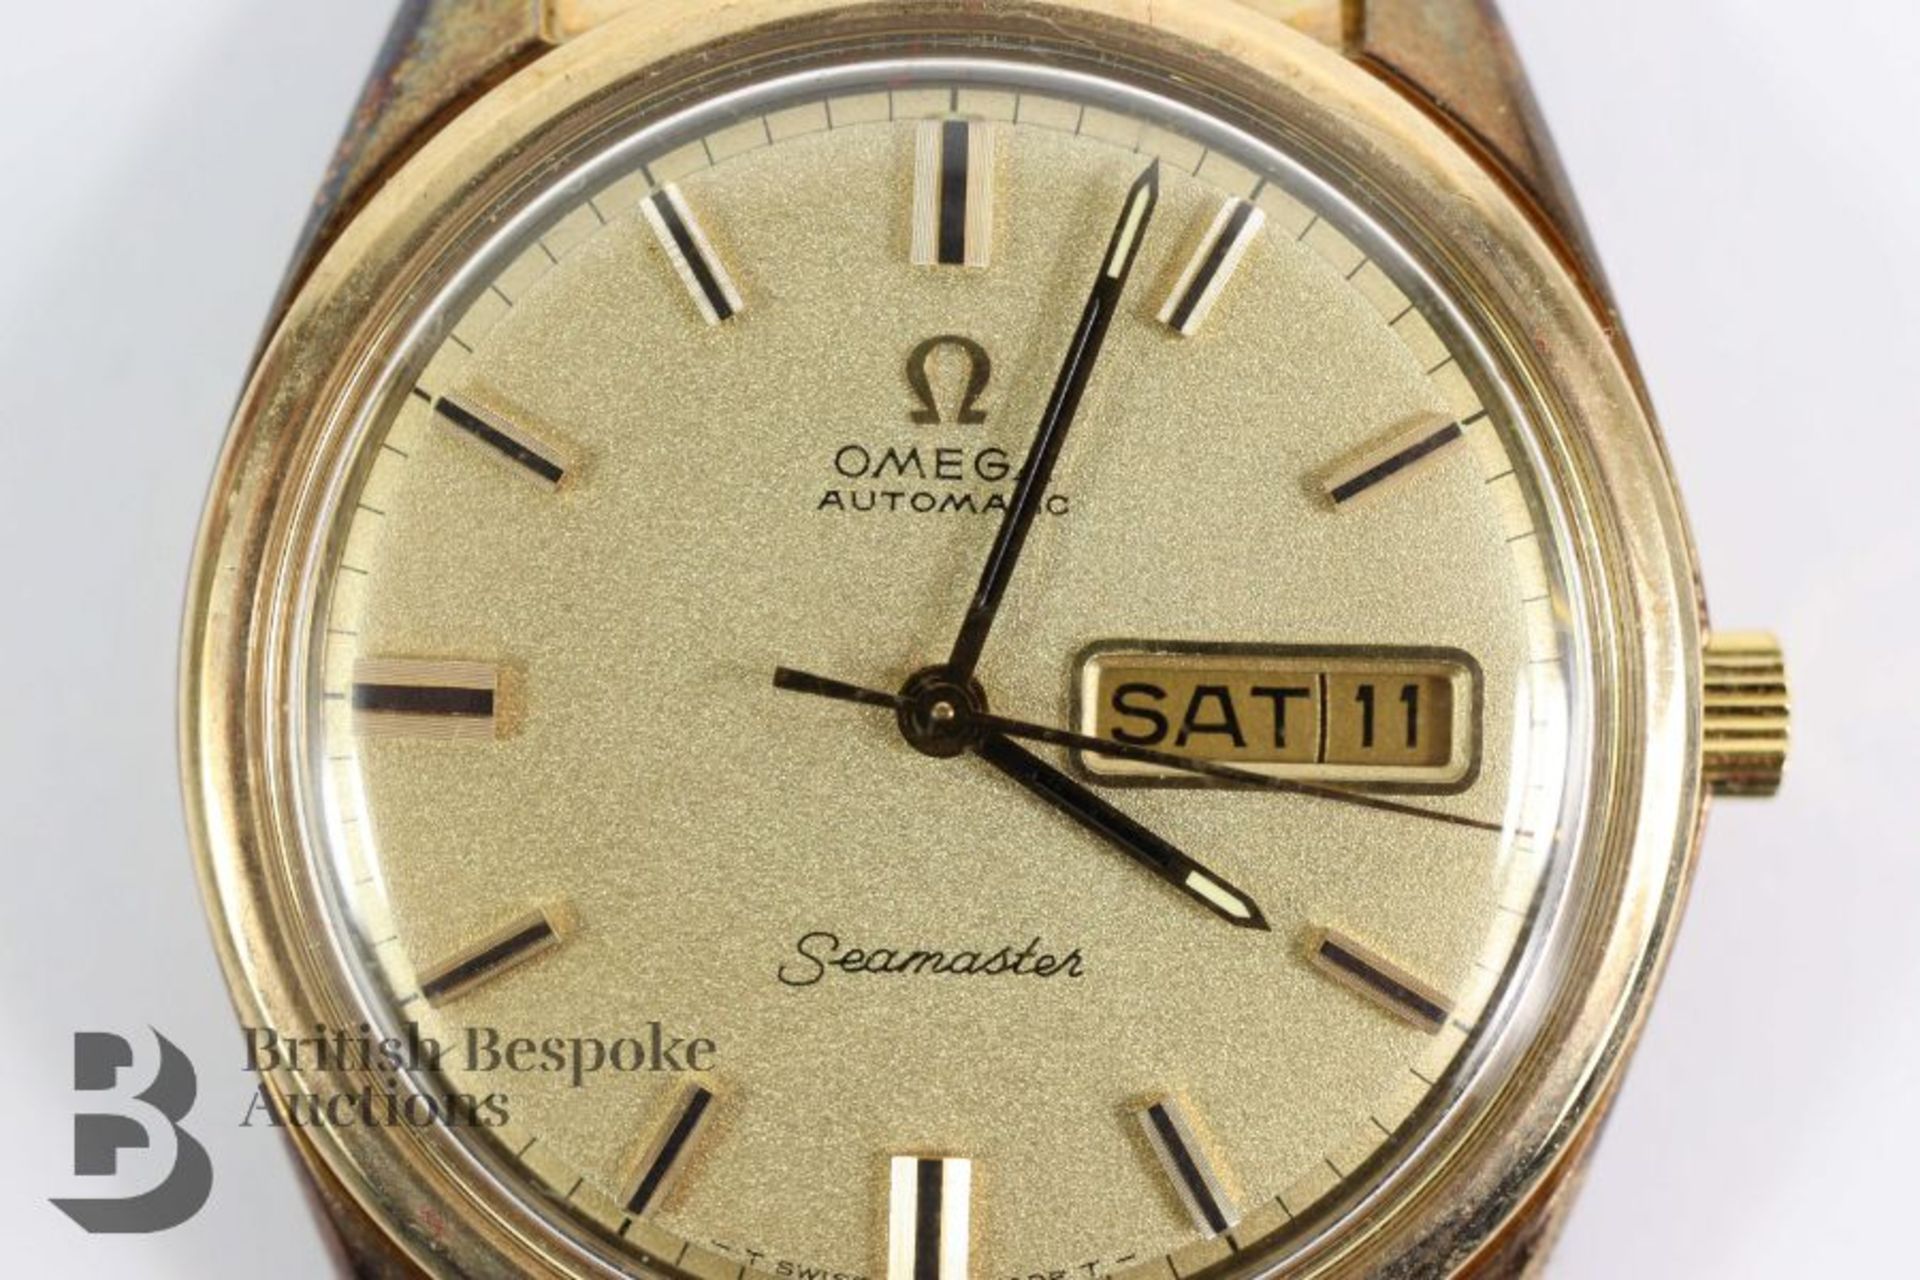 Gentleman's 9ct Gold Omega Seamaster Day Date Wrist Watch - Image 4 of 11